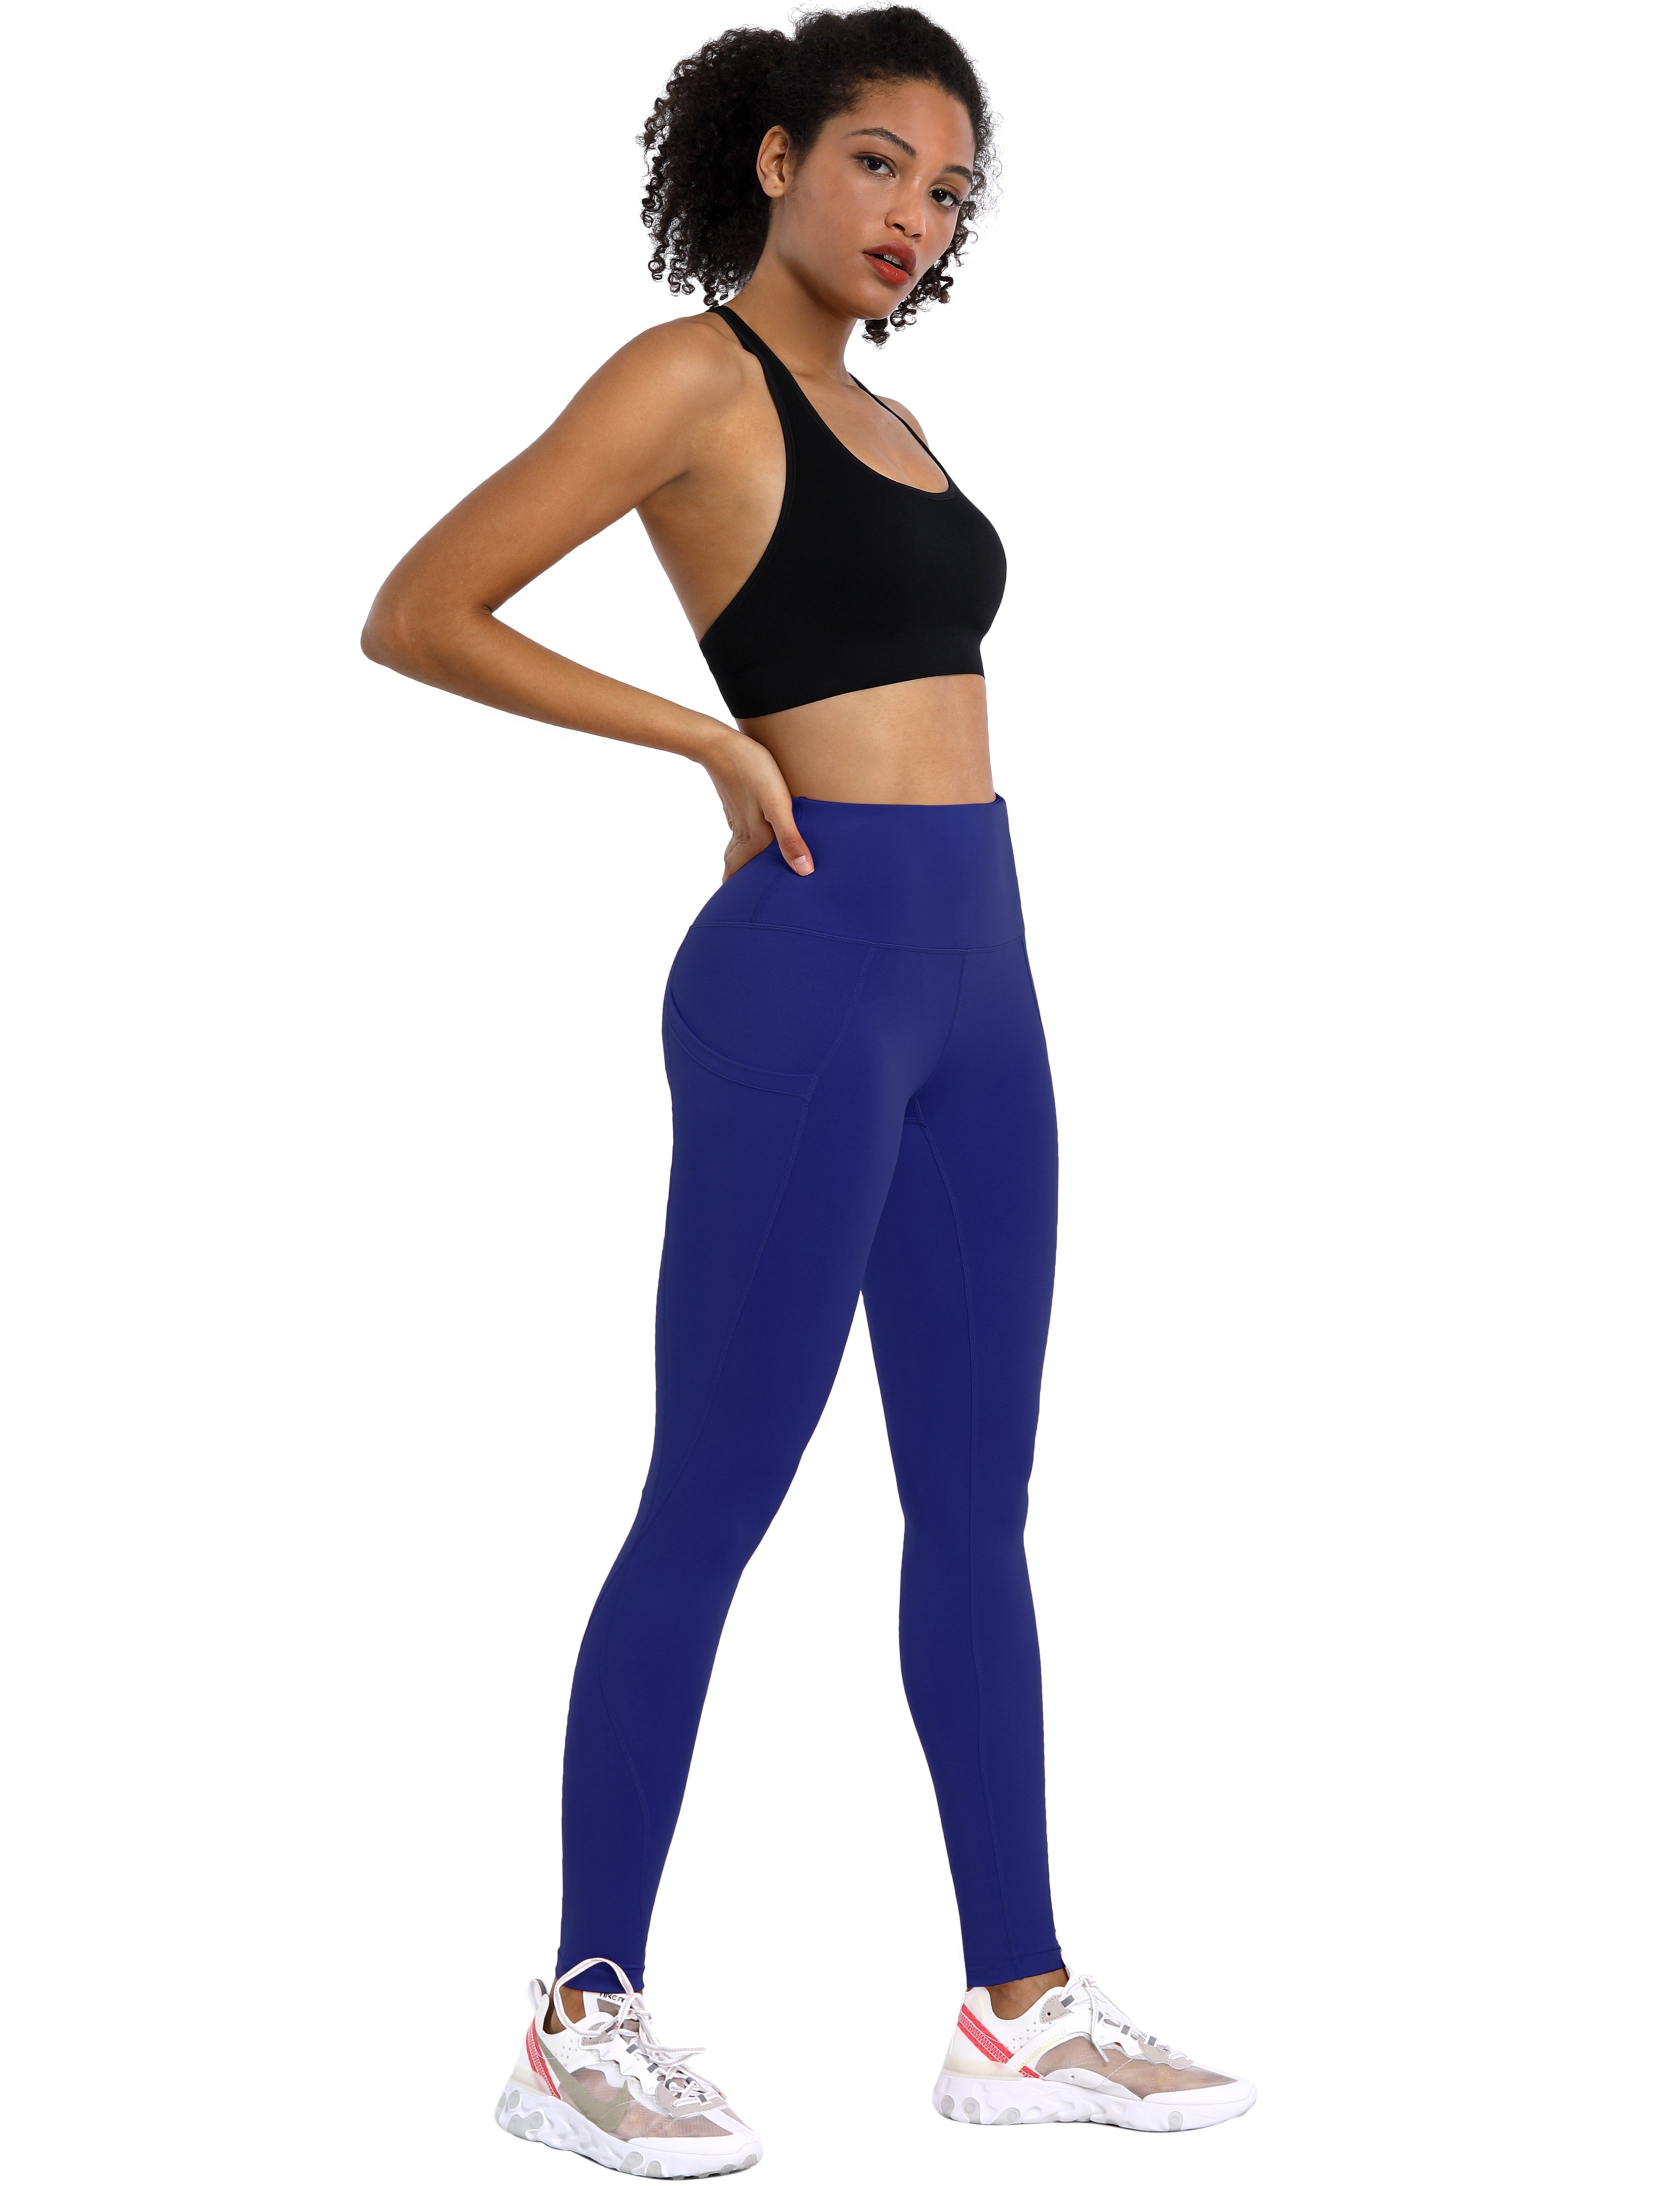 High Waist Side Pockets Pilates Pants navy 75% Nylon, 25% Spandex Fabric doesn't attract lint easily 4-way stretch No see-through Moisture-wicking Tummy control Inner pocket